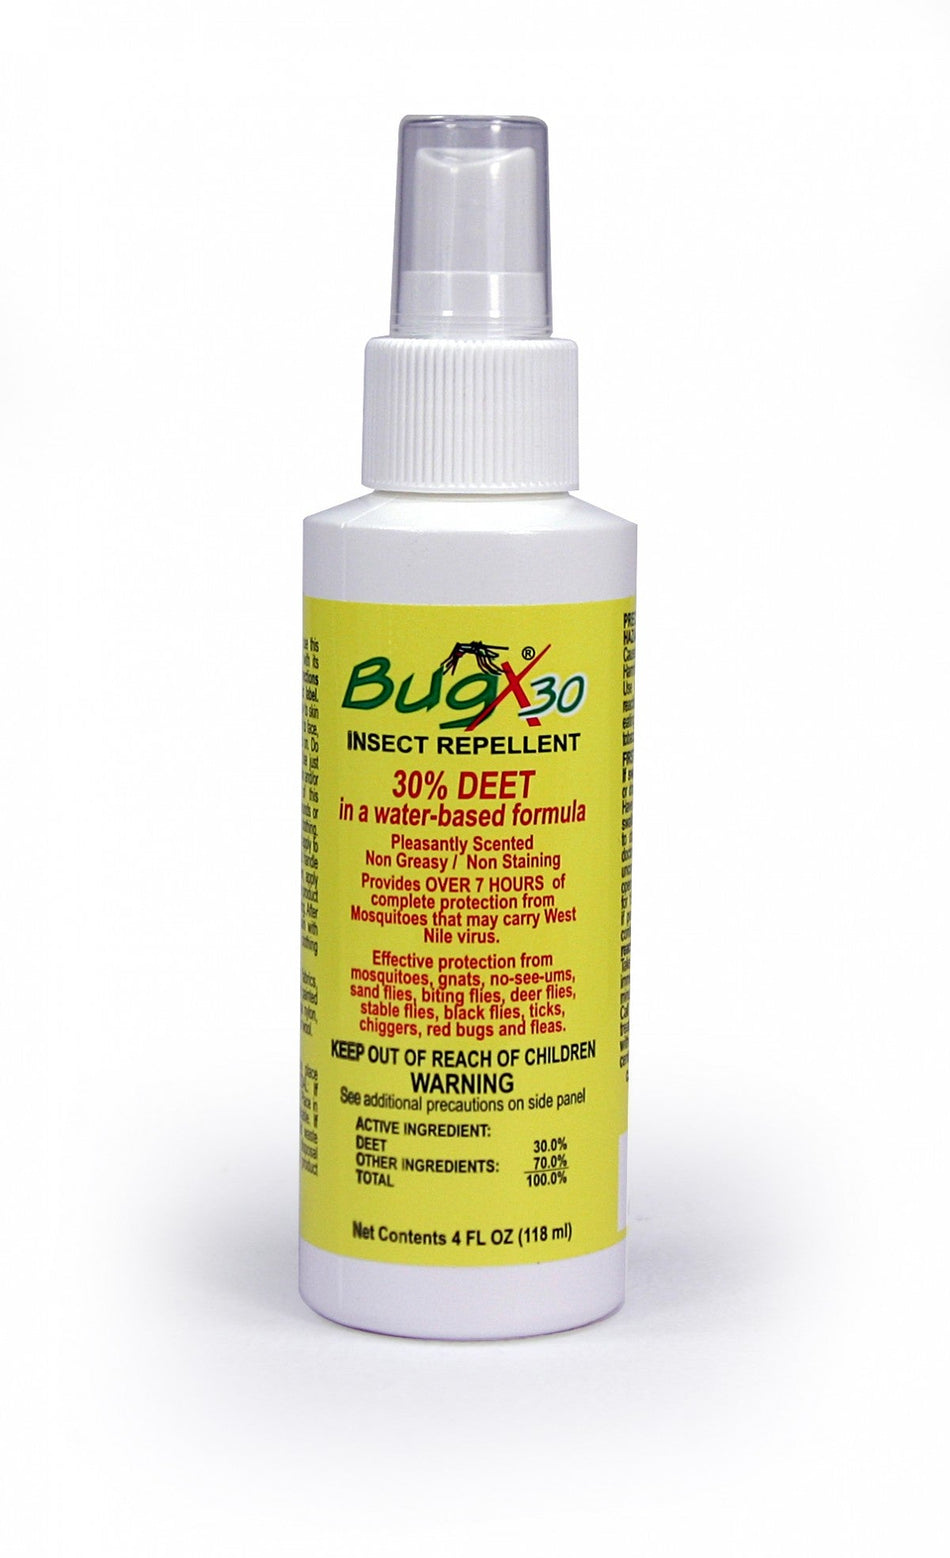 18-794 First Aid Only BugX30 Insect Repellent Spray DEET, 4 oz. Bottle - Sold per Each